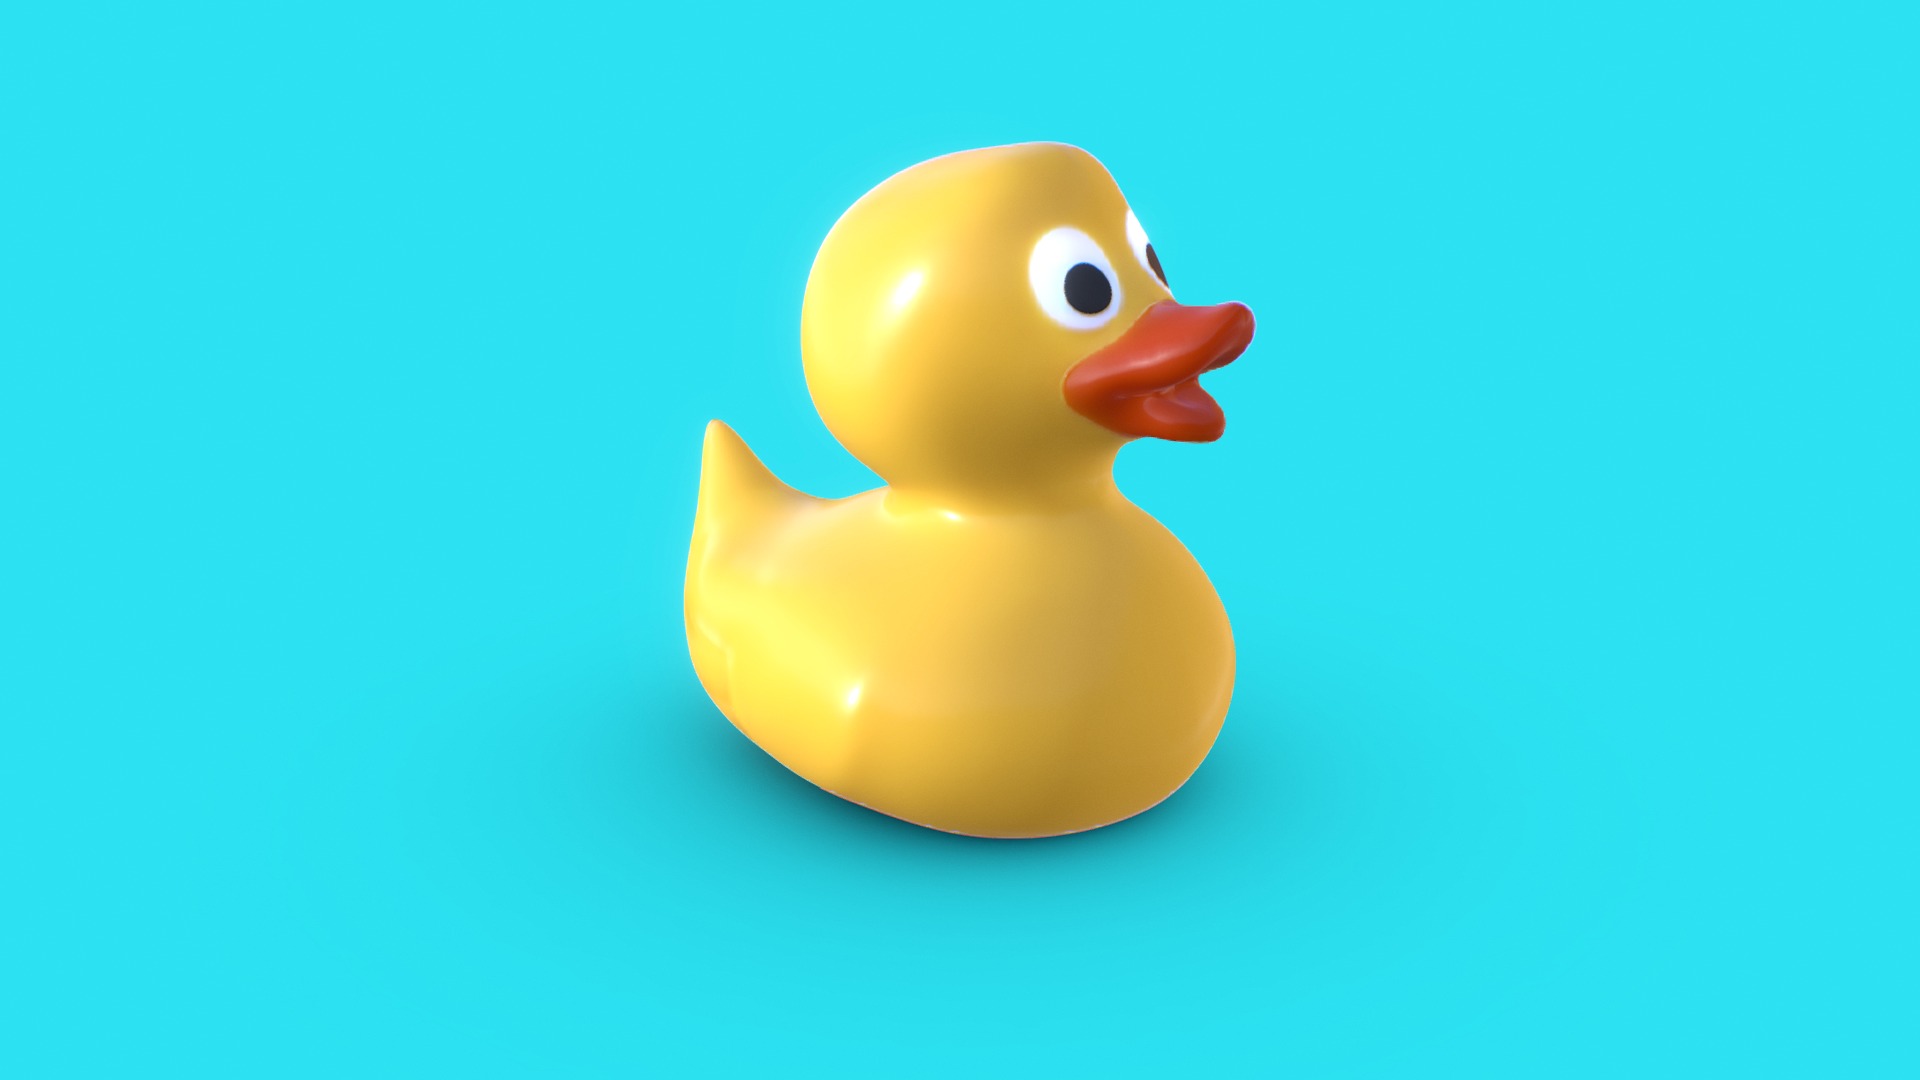 3D model Rubber Duck - This is a 3D model of the Rubber Duck. The 3D model is about a yellow rubber duck.